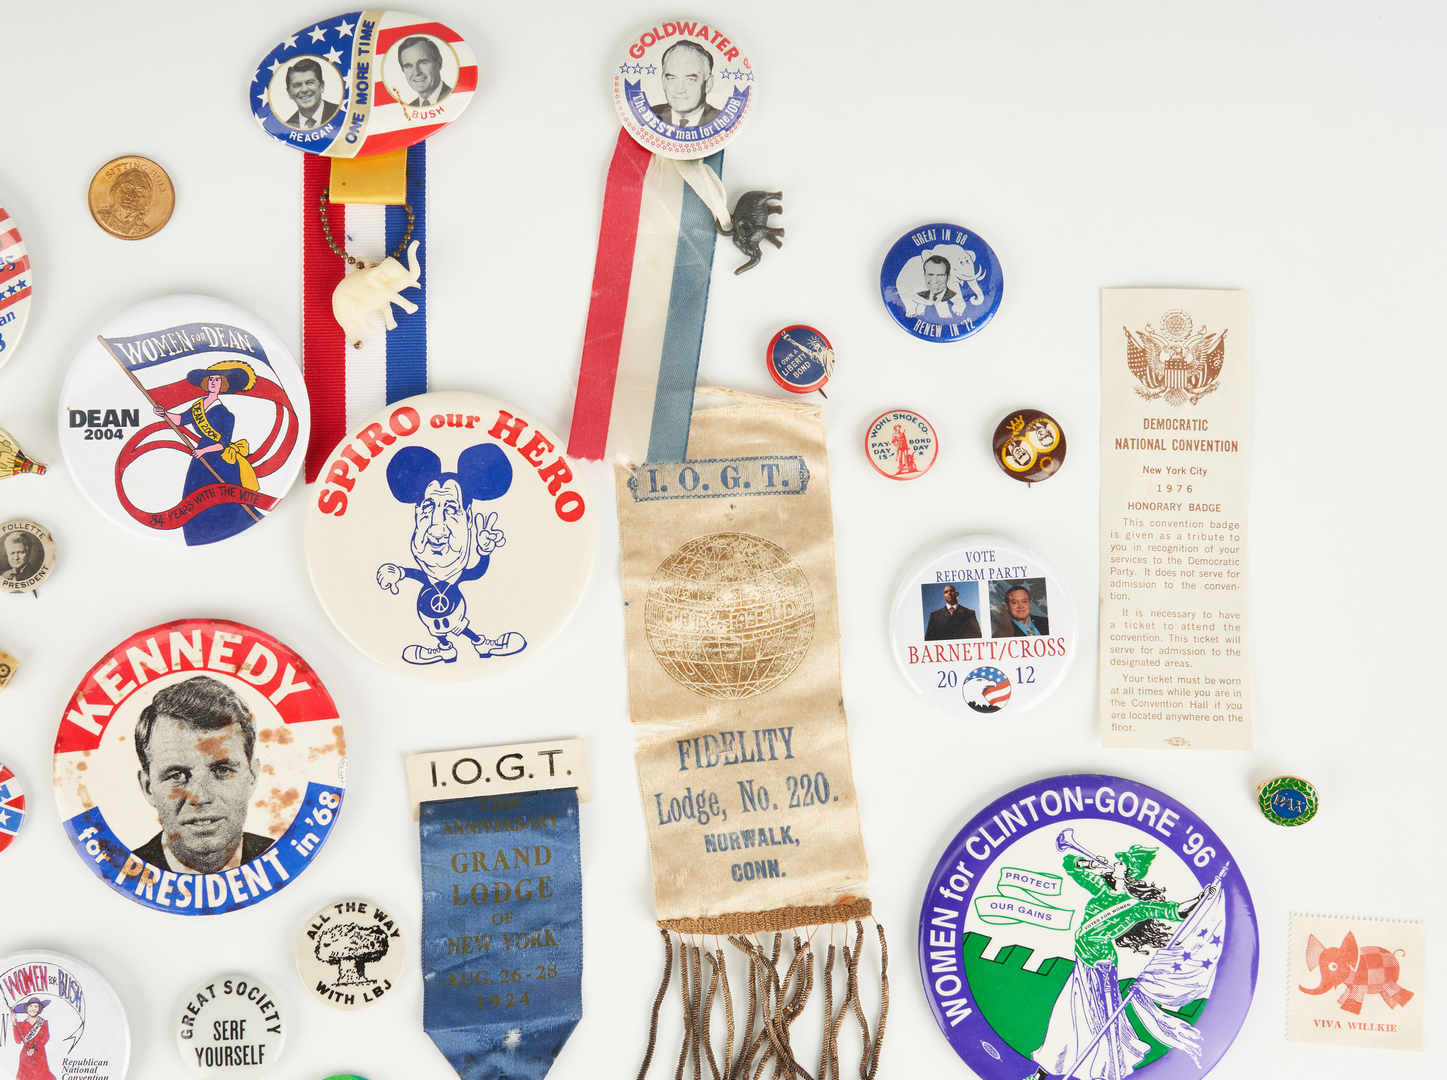 Lot 1026: 79 Political Ephemera Items, incl. Presidential Campaign Buttons